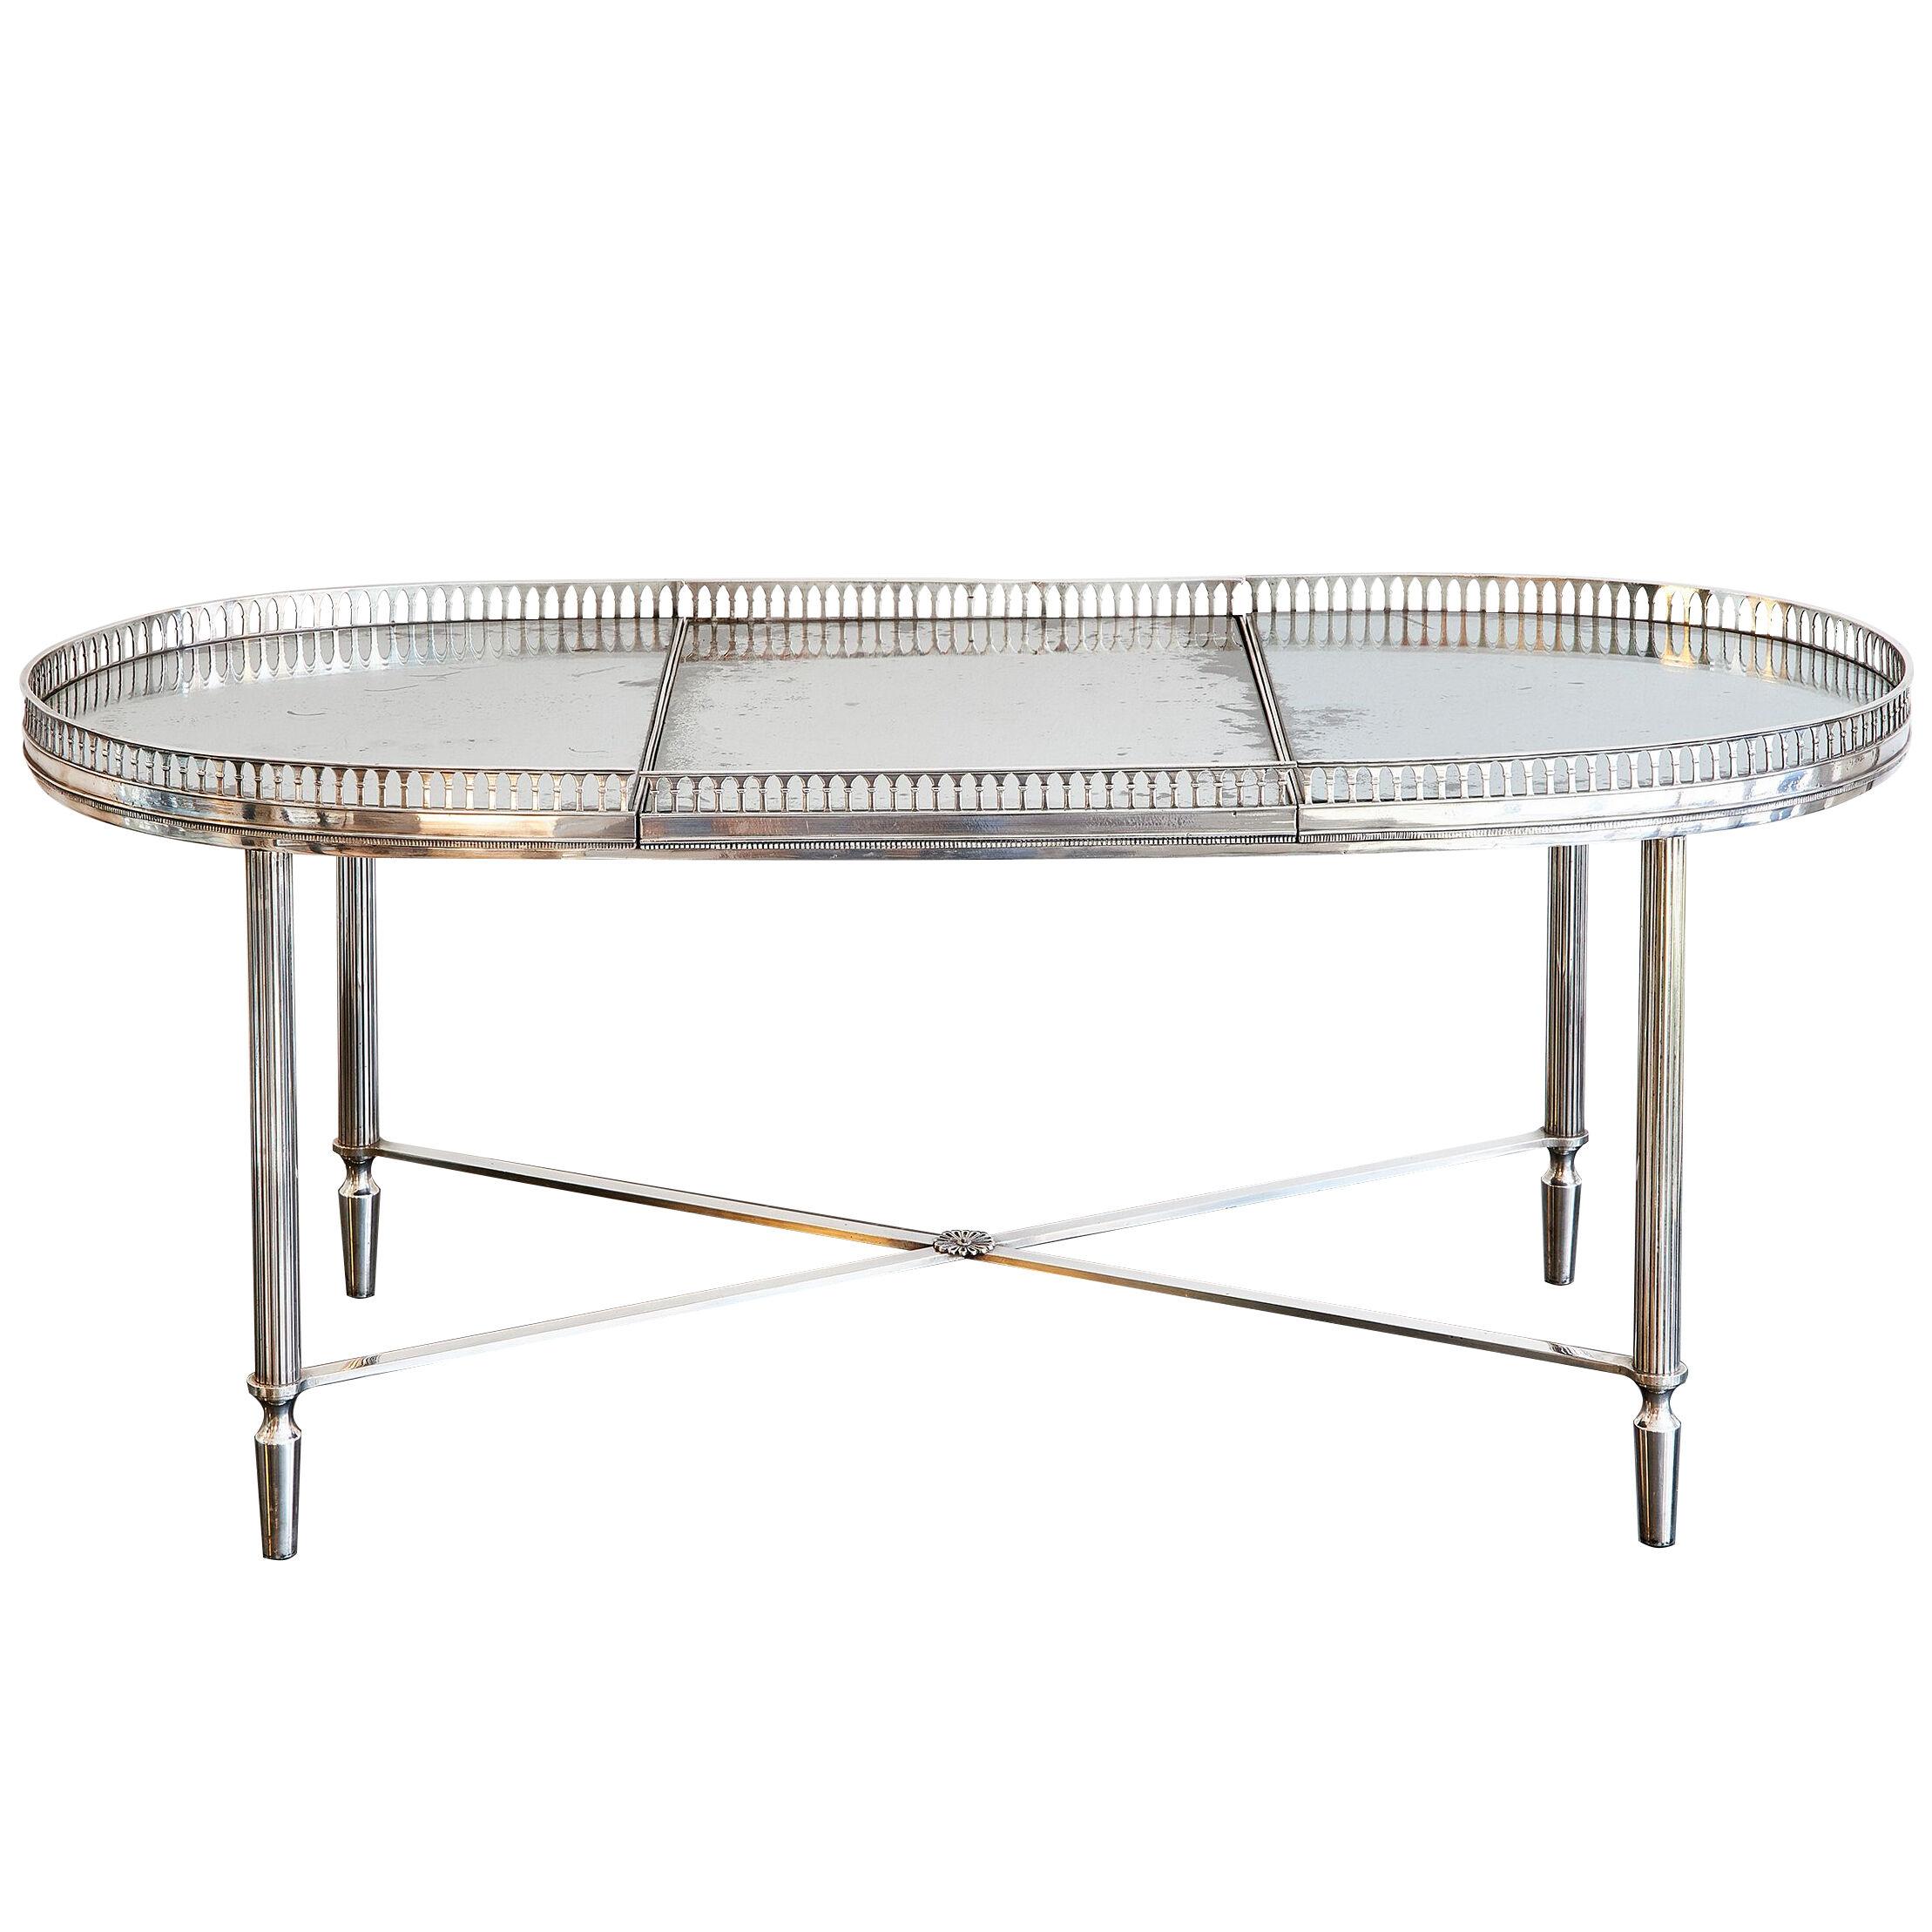 Maison Jansen, Paris, Quality Silvered Coffee Table with original mirrored top